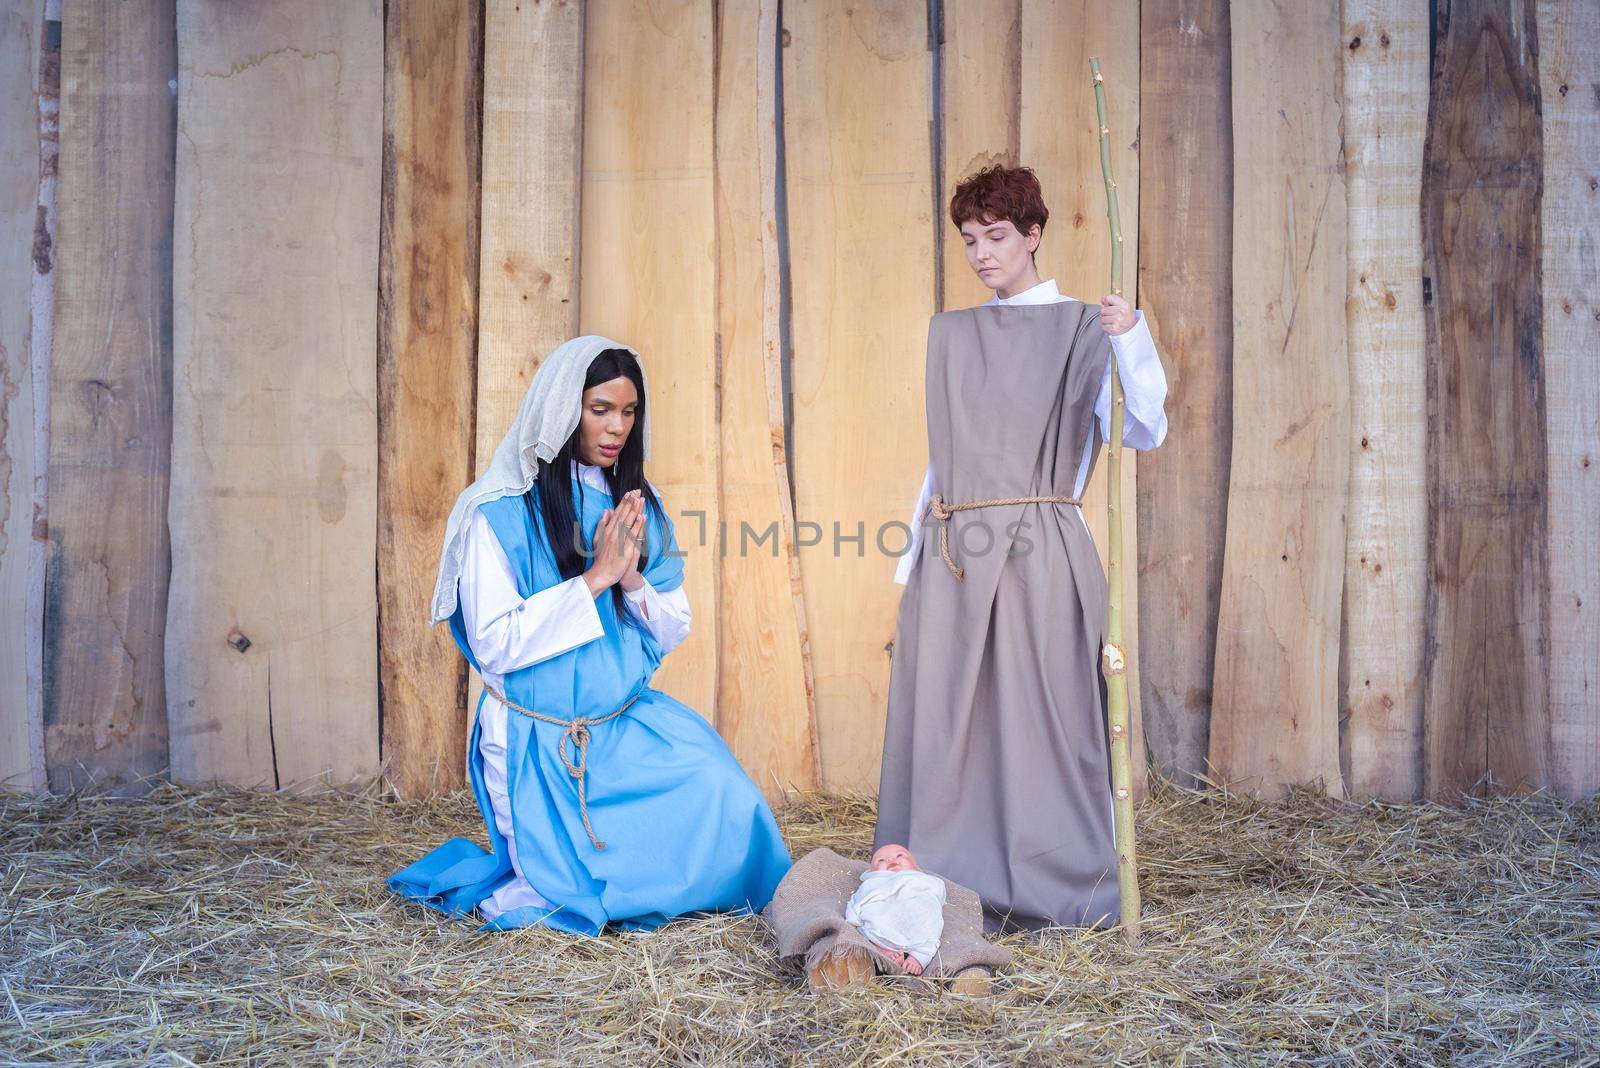 Christmas crib with two transgender people representing a scene of Mary and Joseph